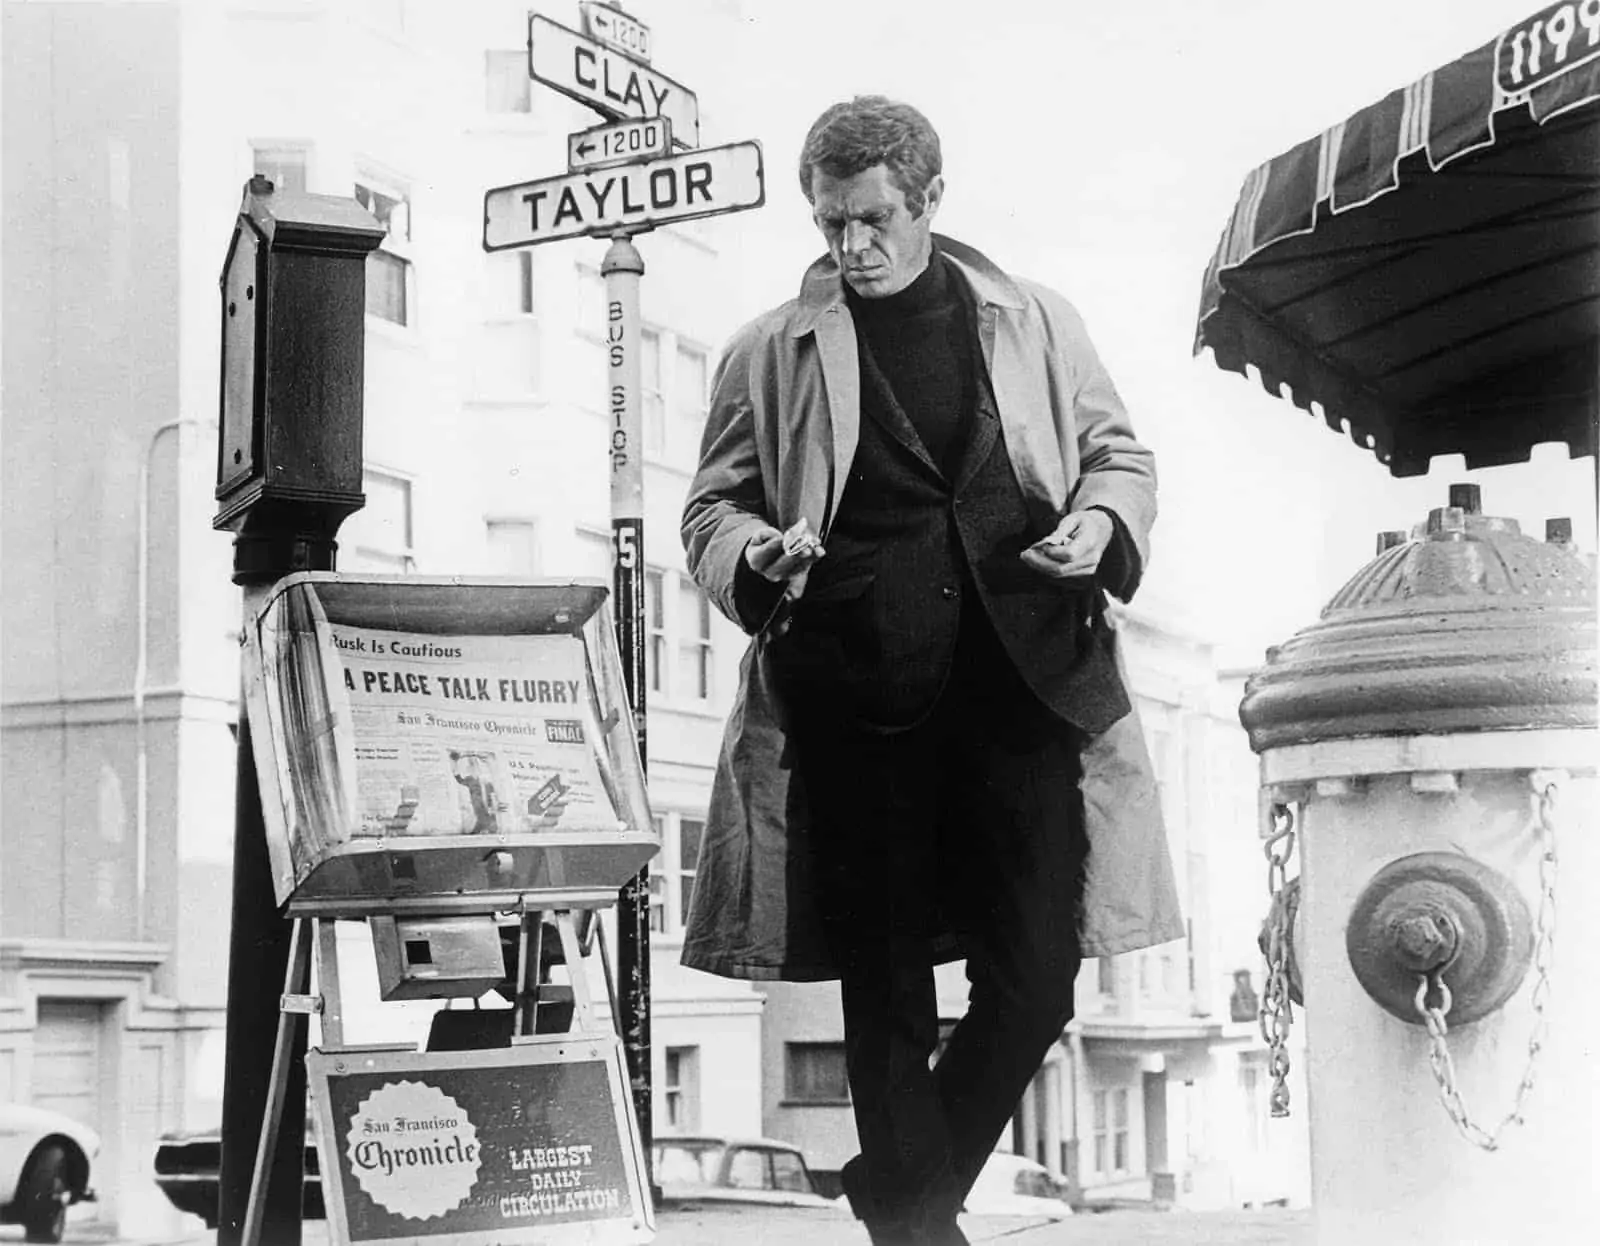 Steve McQueen wearing iconic menswear pieces including a turtleneck